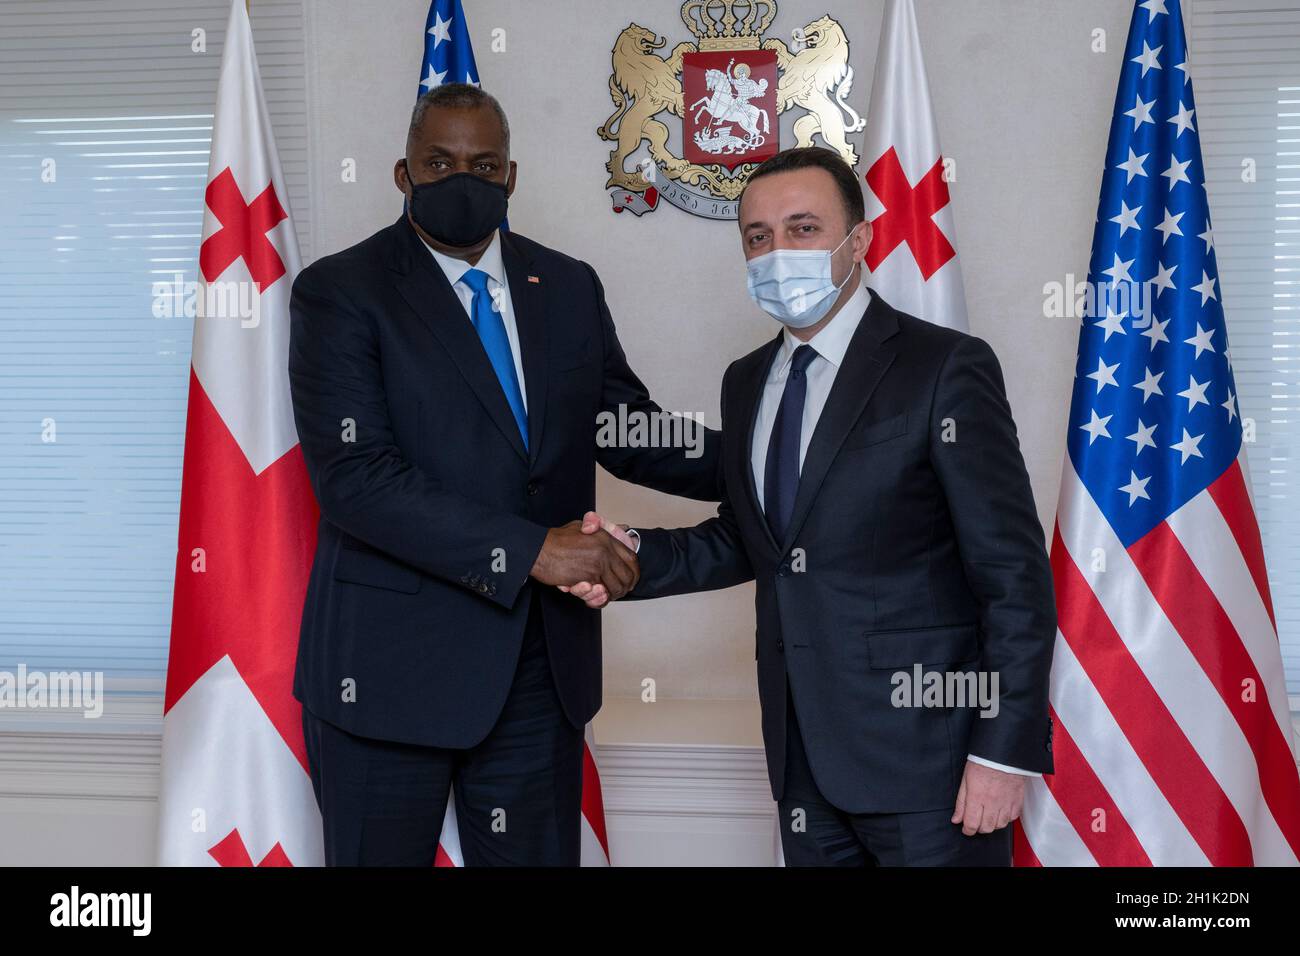 Tbilisi, Georgia. 18th Oct, 2021. U.S. Secretary of Defense Lloyd J. Austin III, is welcomed by Georgian Prime Minsiter Irakli Garibashvili, right, for bilateral discussions at the Prime Ministers office October 18, 2021 in Tbilisi, Georgia. Austin is in Tbilisi to reaffirm U.S. support for sovereignty and territorial integrity. Credit: Chad McNeeley/DOD/Alamy Live News Stock Photo